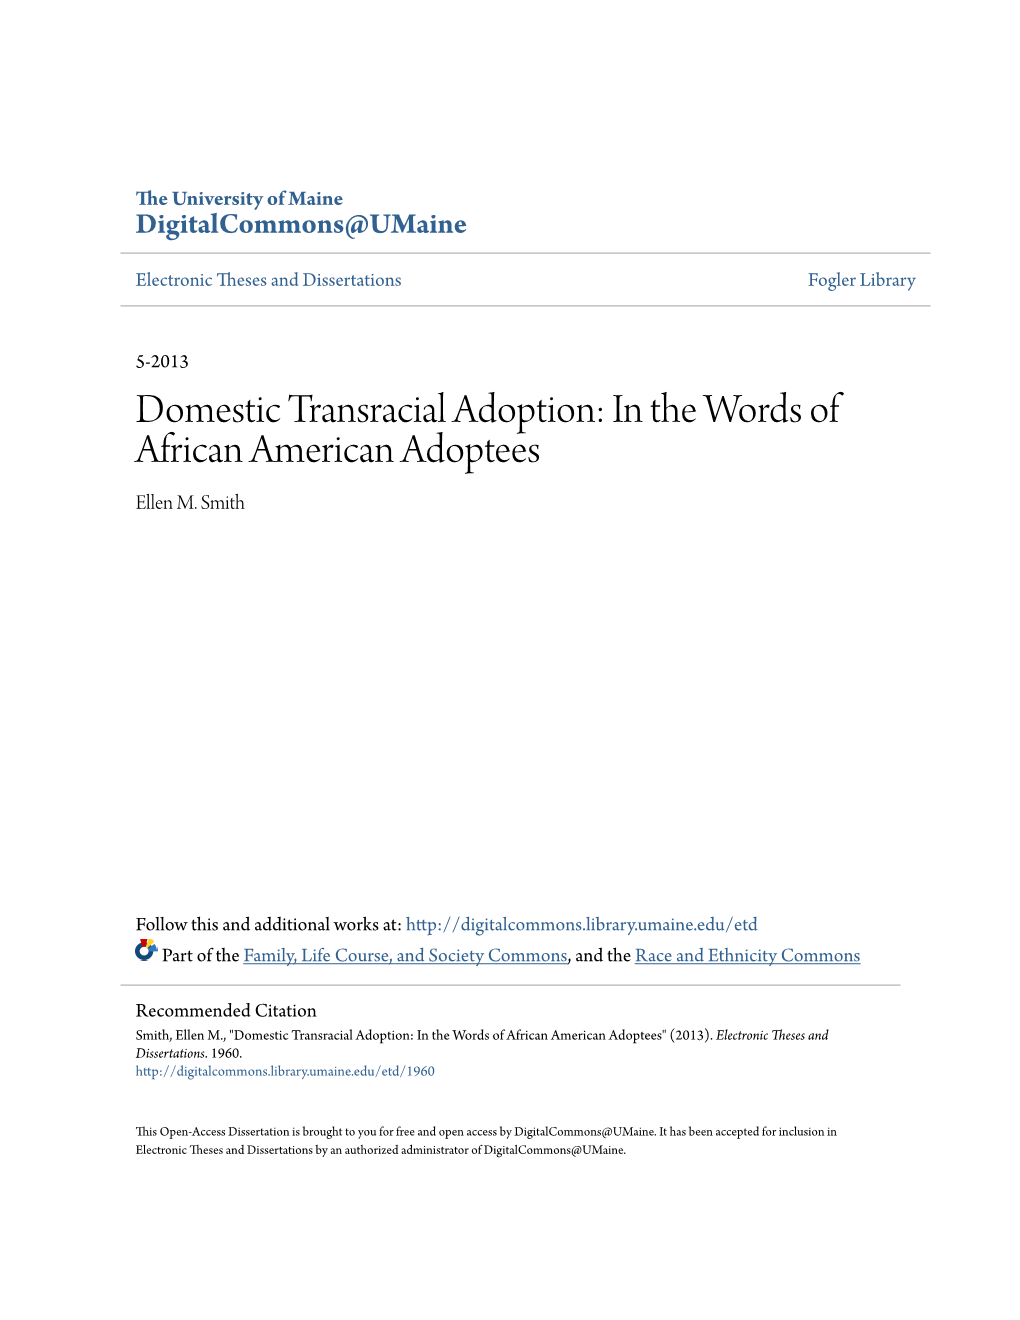 Domestic Transracial Adoption: in the Words of African American Adoptees Ellen M